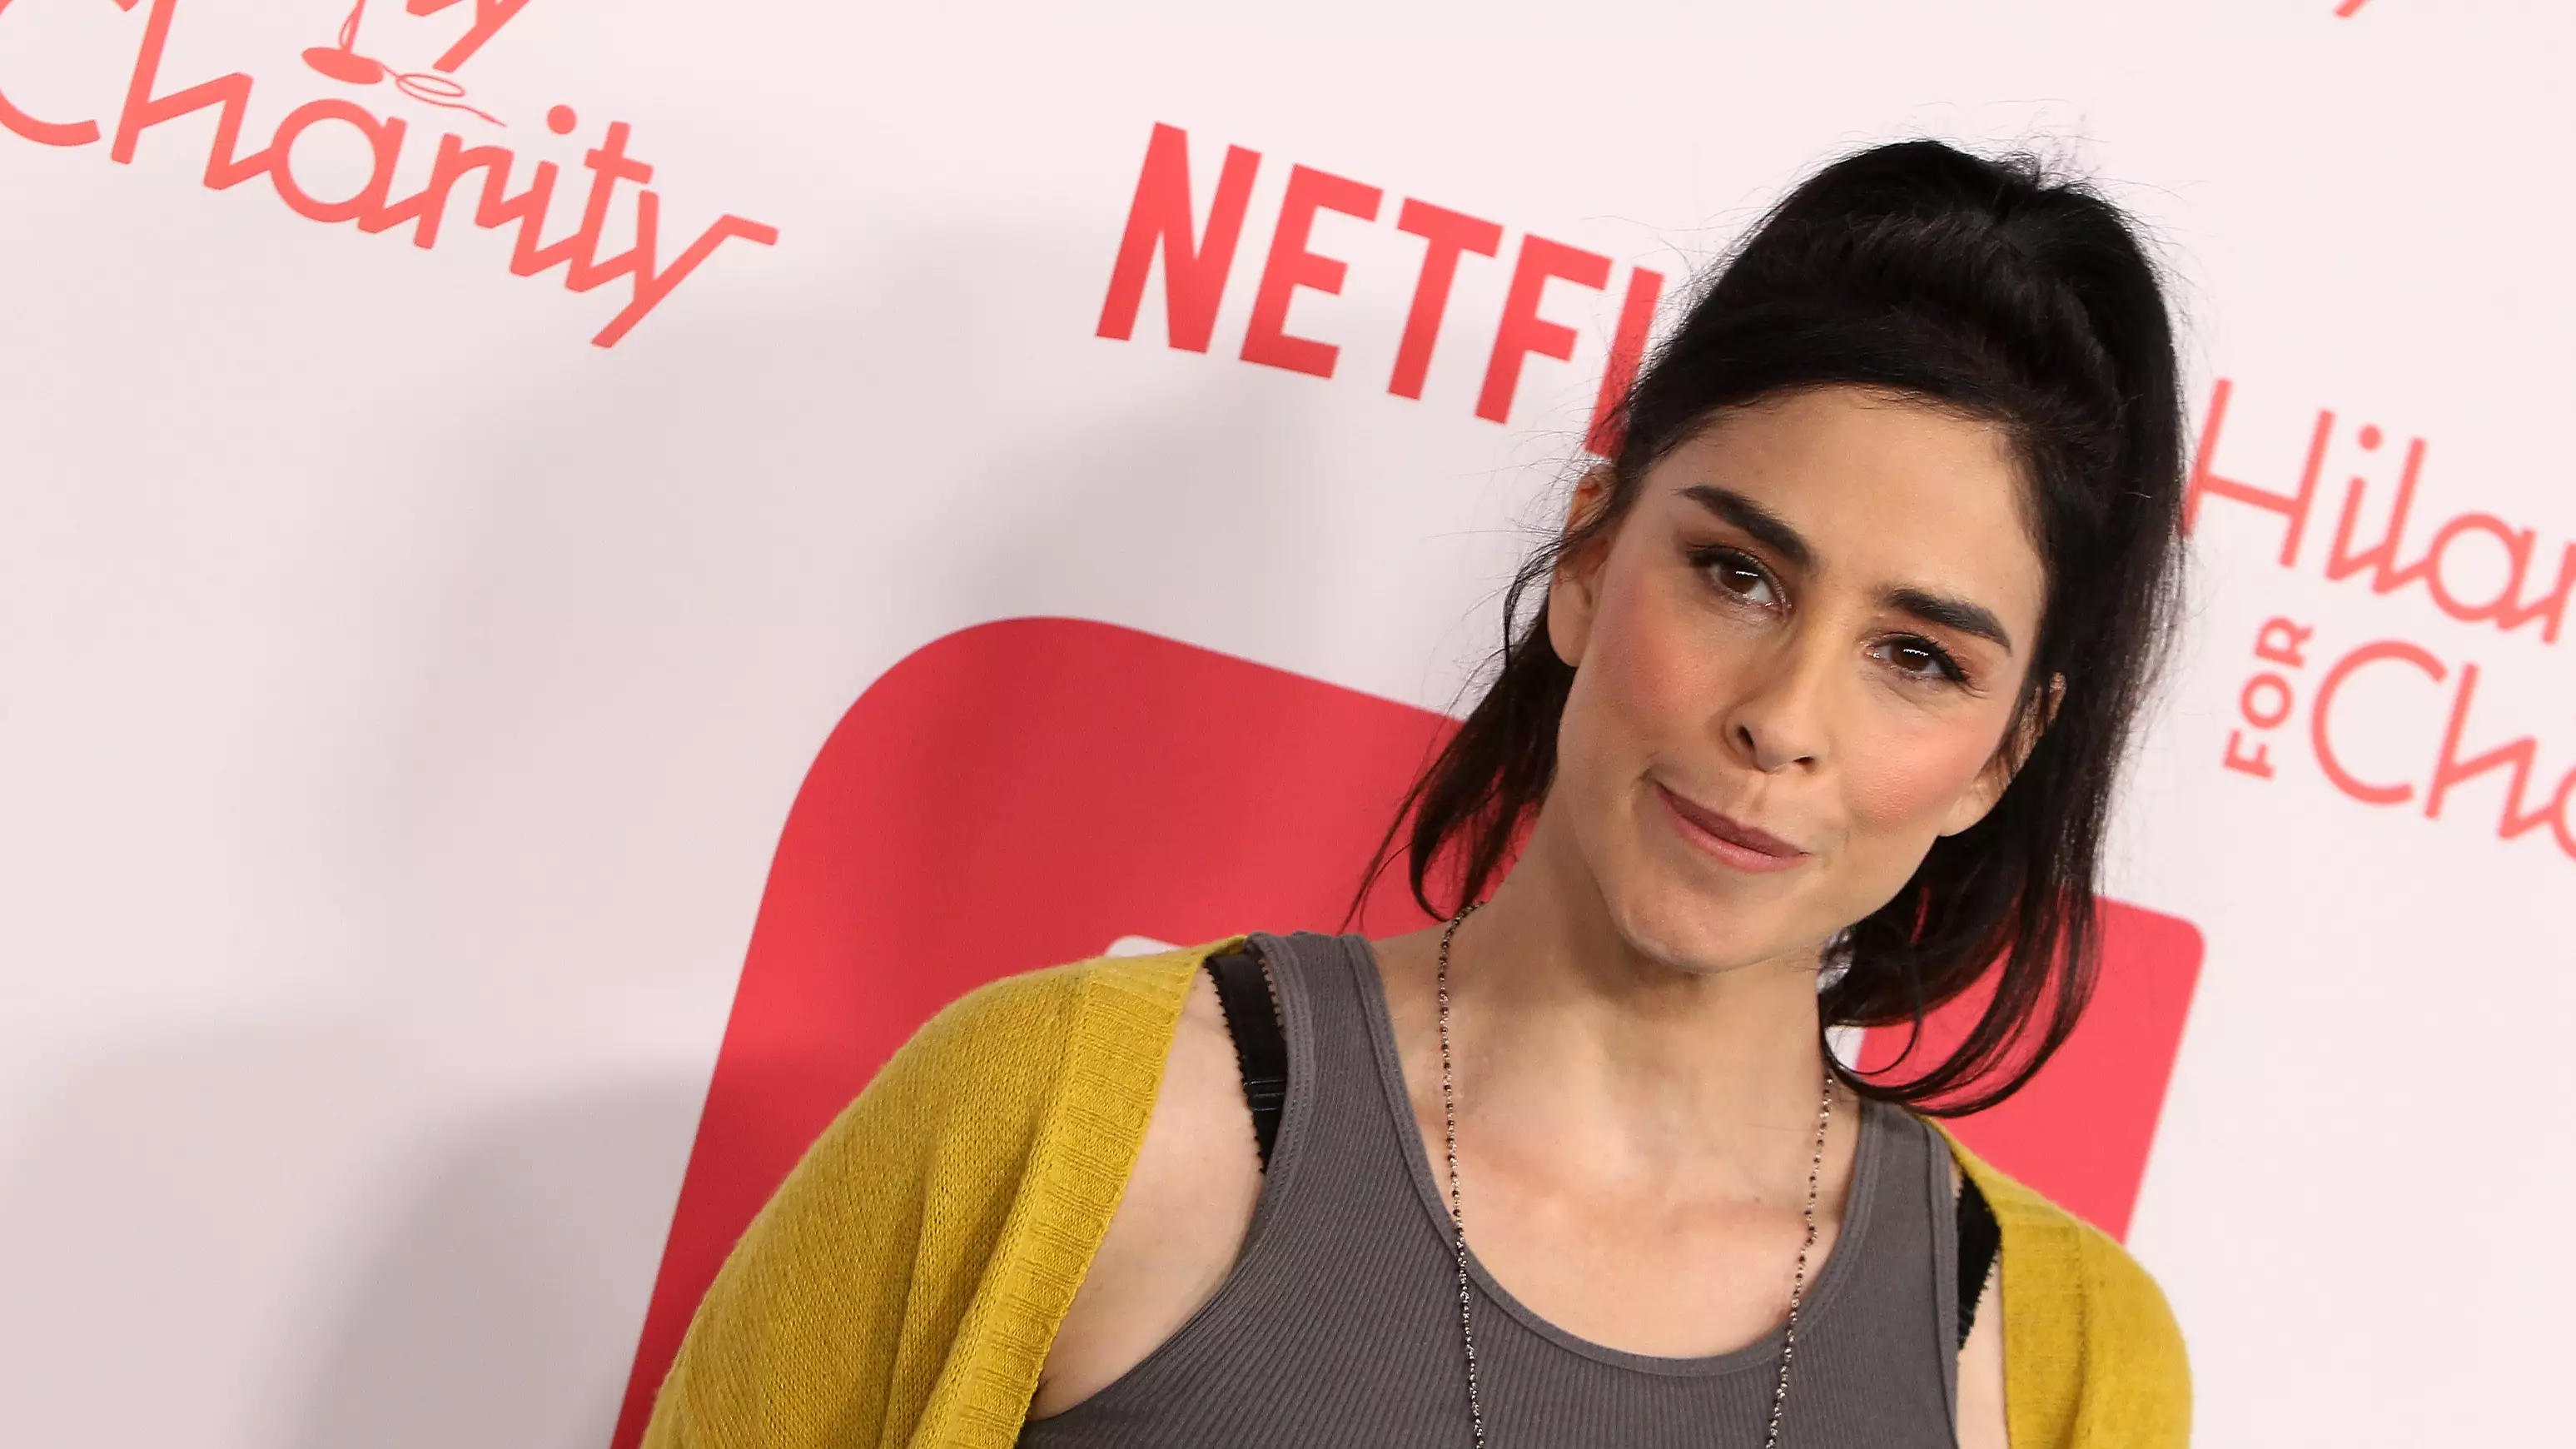 Sarah Silverman Hits Back After Being Branded A 'Paedophile' Over Old Tweet